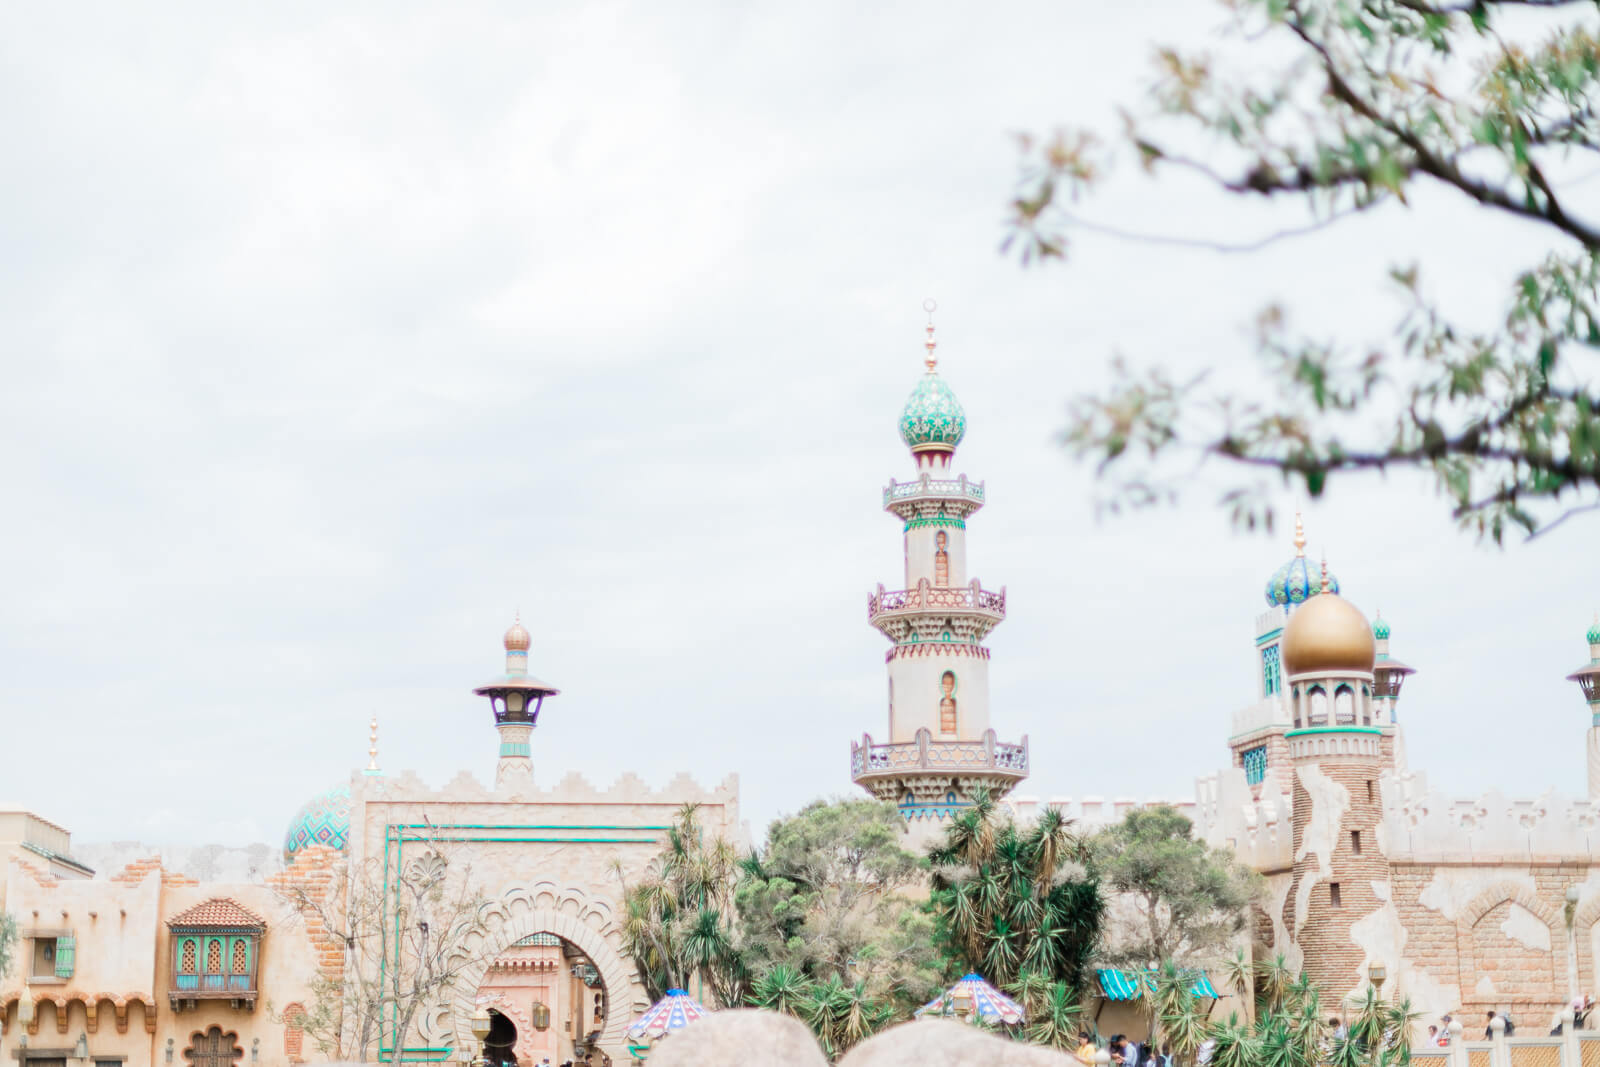 What to do what to see and what to eat in one day at Tokyo Disney Sea. The park is huge and so different, but there are certain things you don't wanna miss!